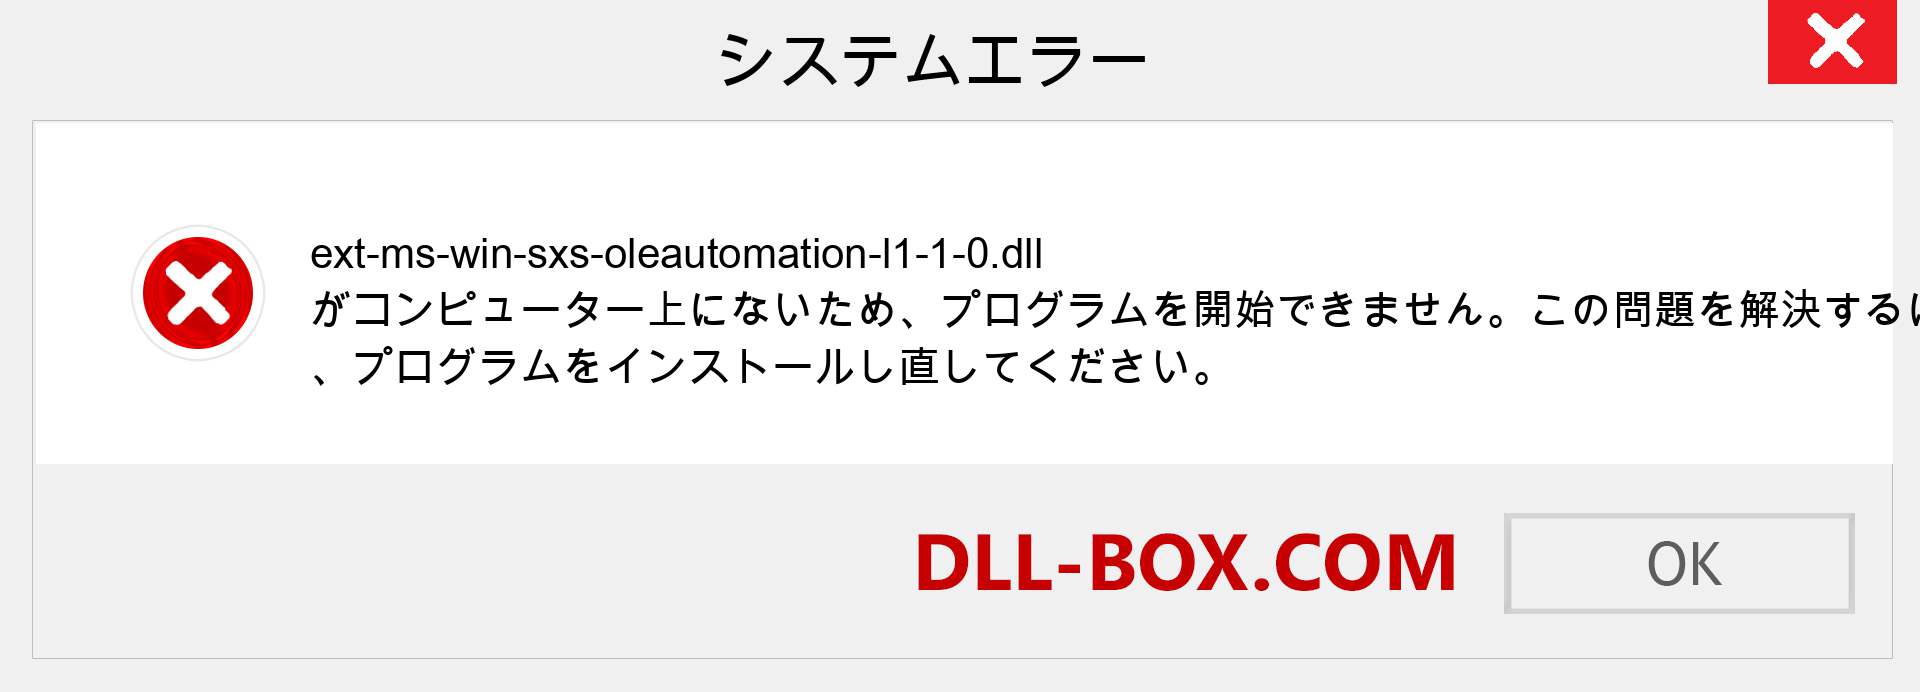 ext-ms-win-sxs-oleautomation-l1-1-0.dllファイルがありませんか？ Windows 7、8、10用にダウンロード-Windows、写真、画像でext-ms-win-sxs-oleautomation-l1-1-0dllの欠落エラーを修正